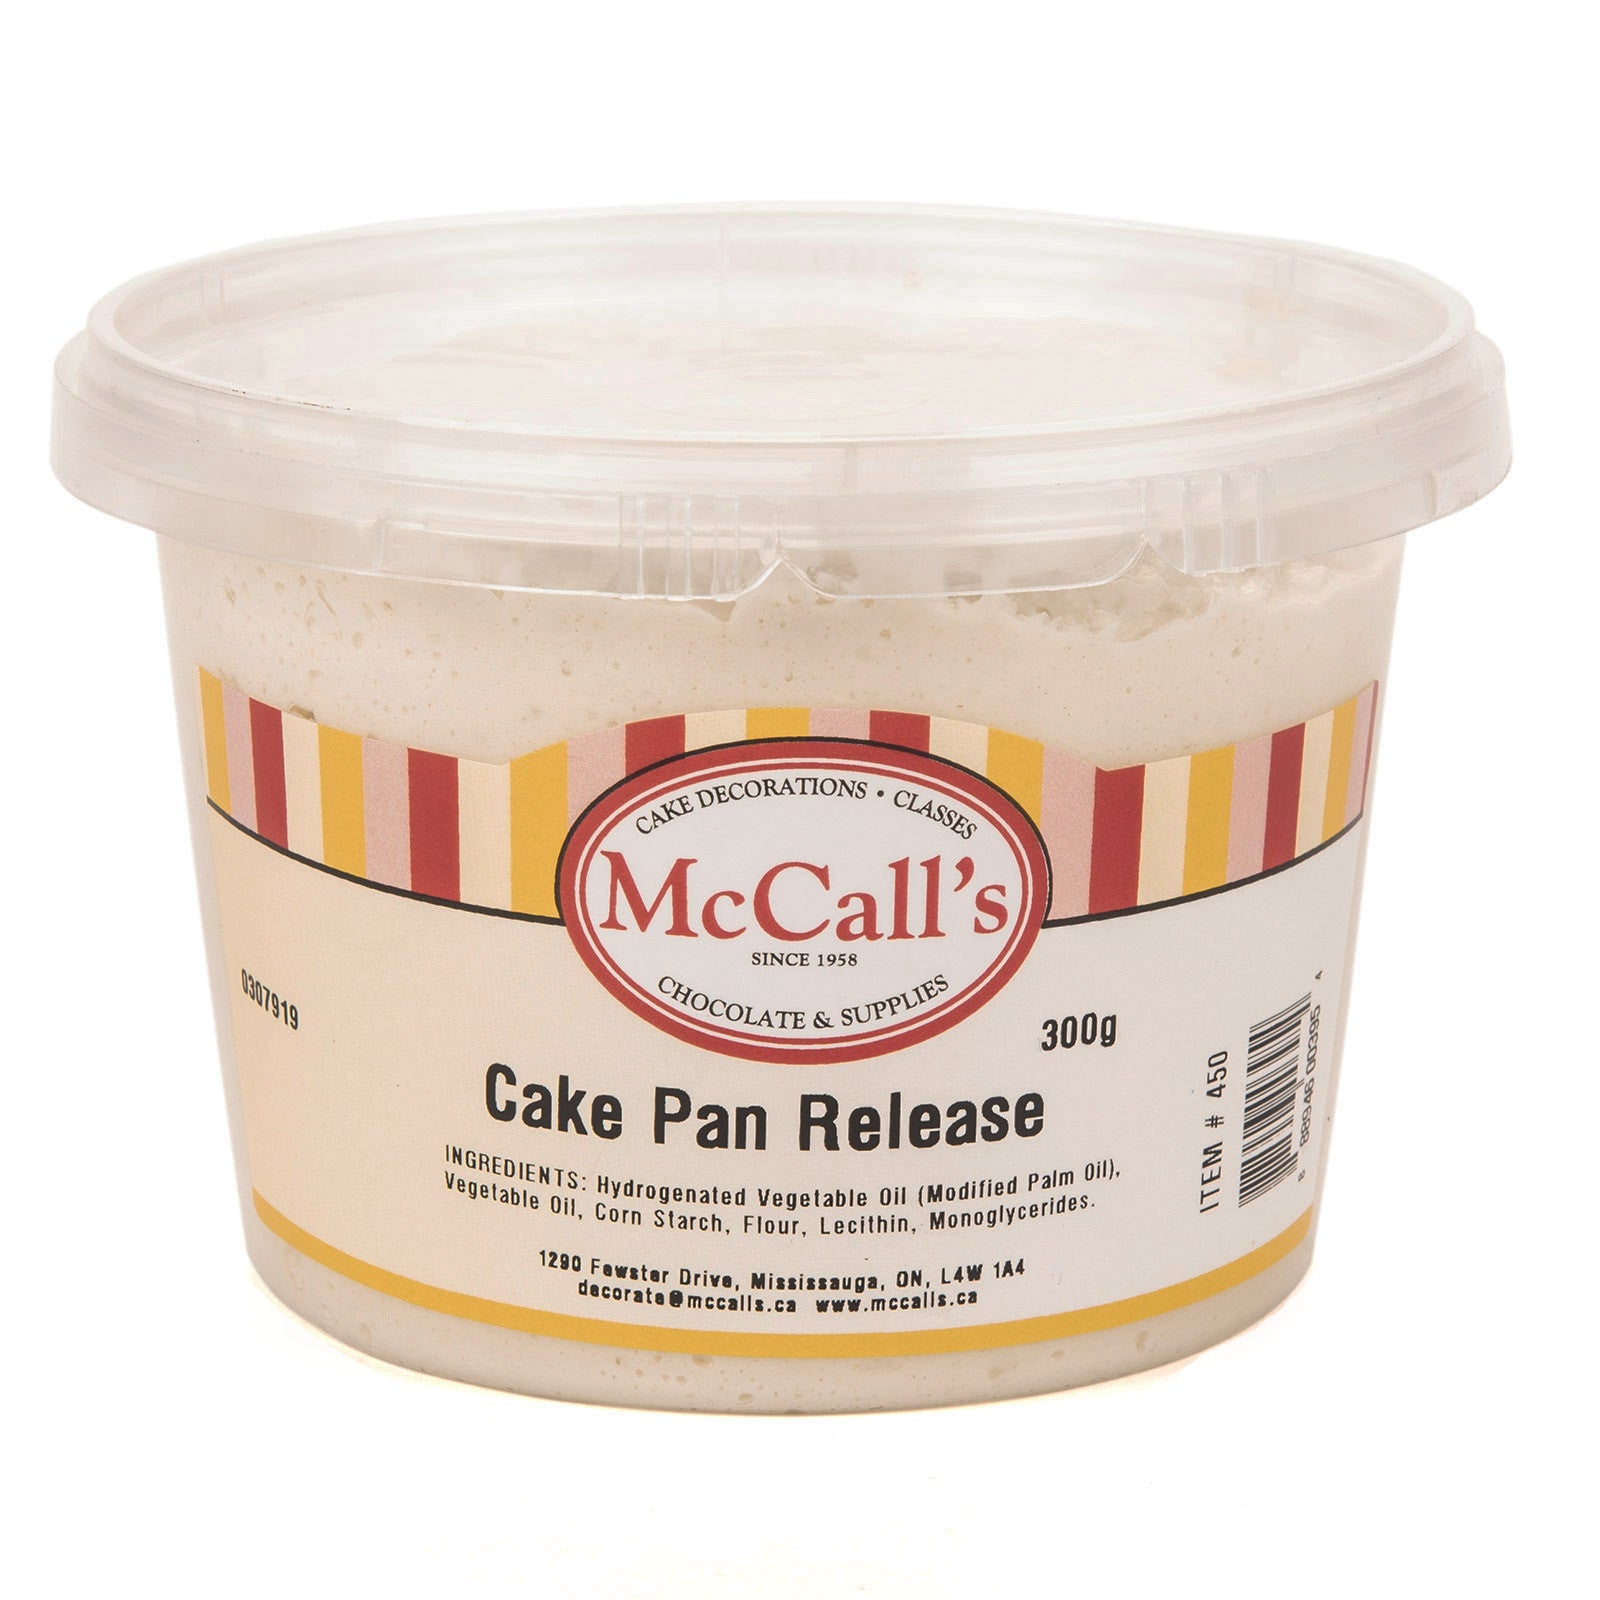 McCall's Cake Pan Release